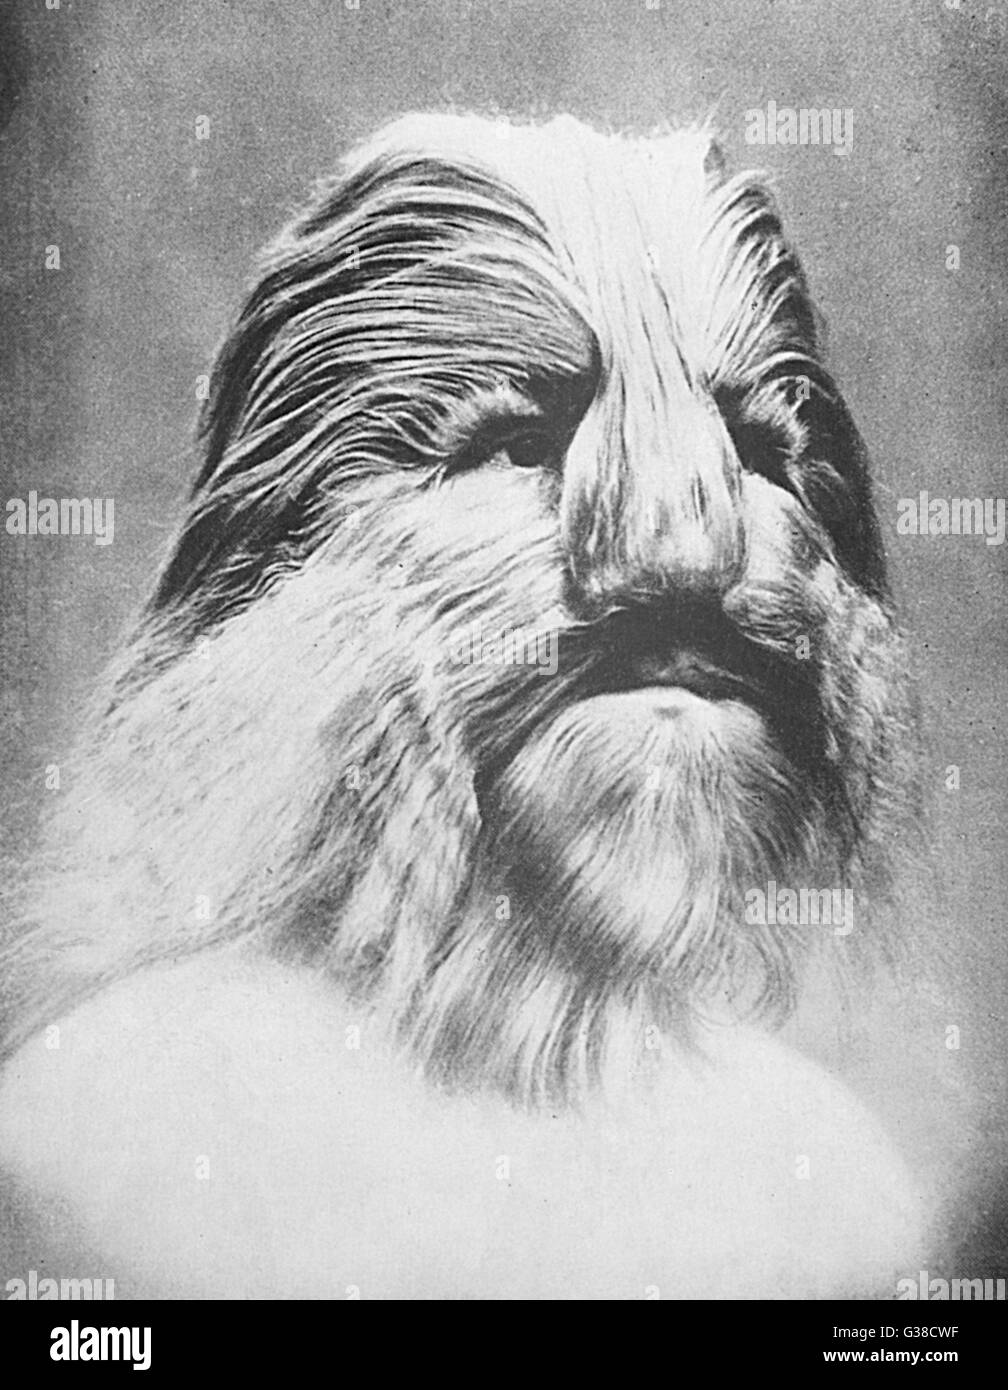 Stephan Bibrowski (18911932), better known as Lionel the Lion-faced Man, was a famous sideshow performer. His whole body was covered with long hair that gave him the appearance of a lion; this was likely due to a rare condition called hypertrichosis. Stock Photo